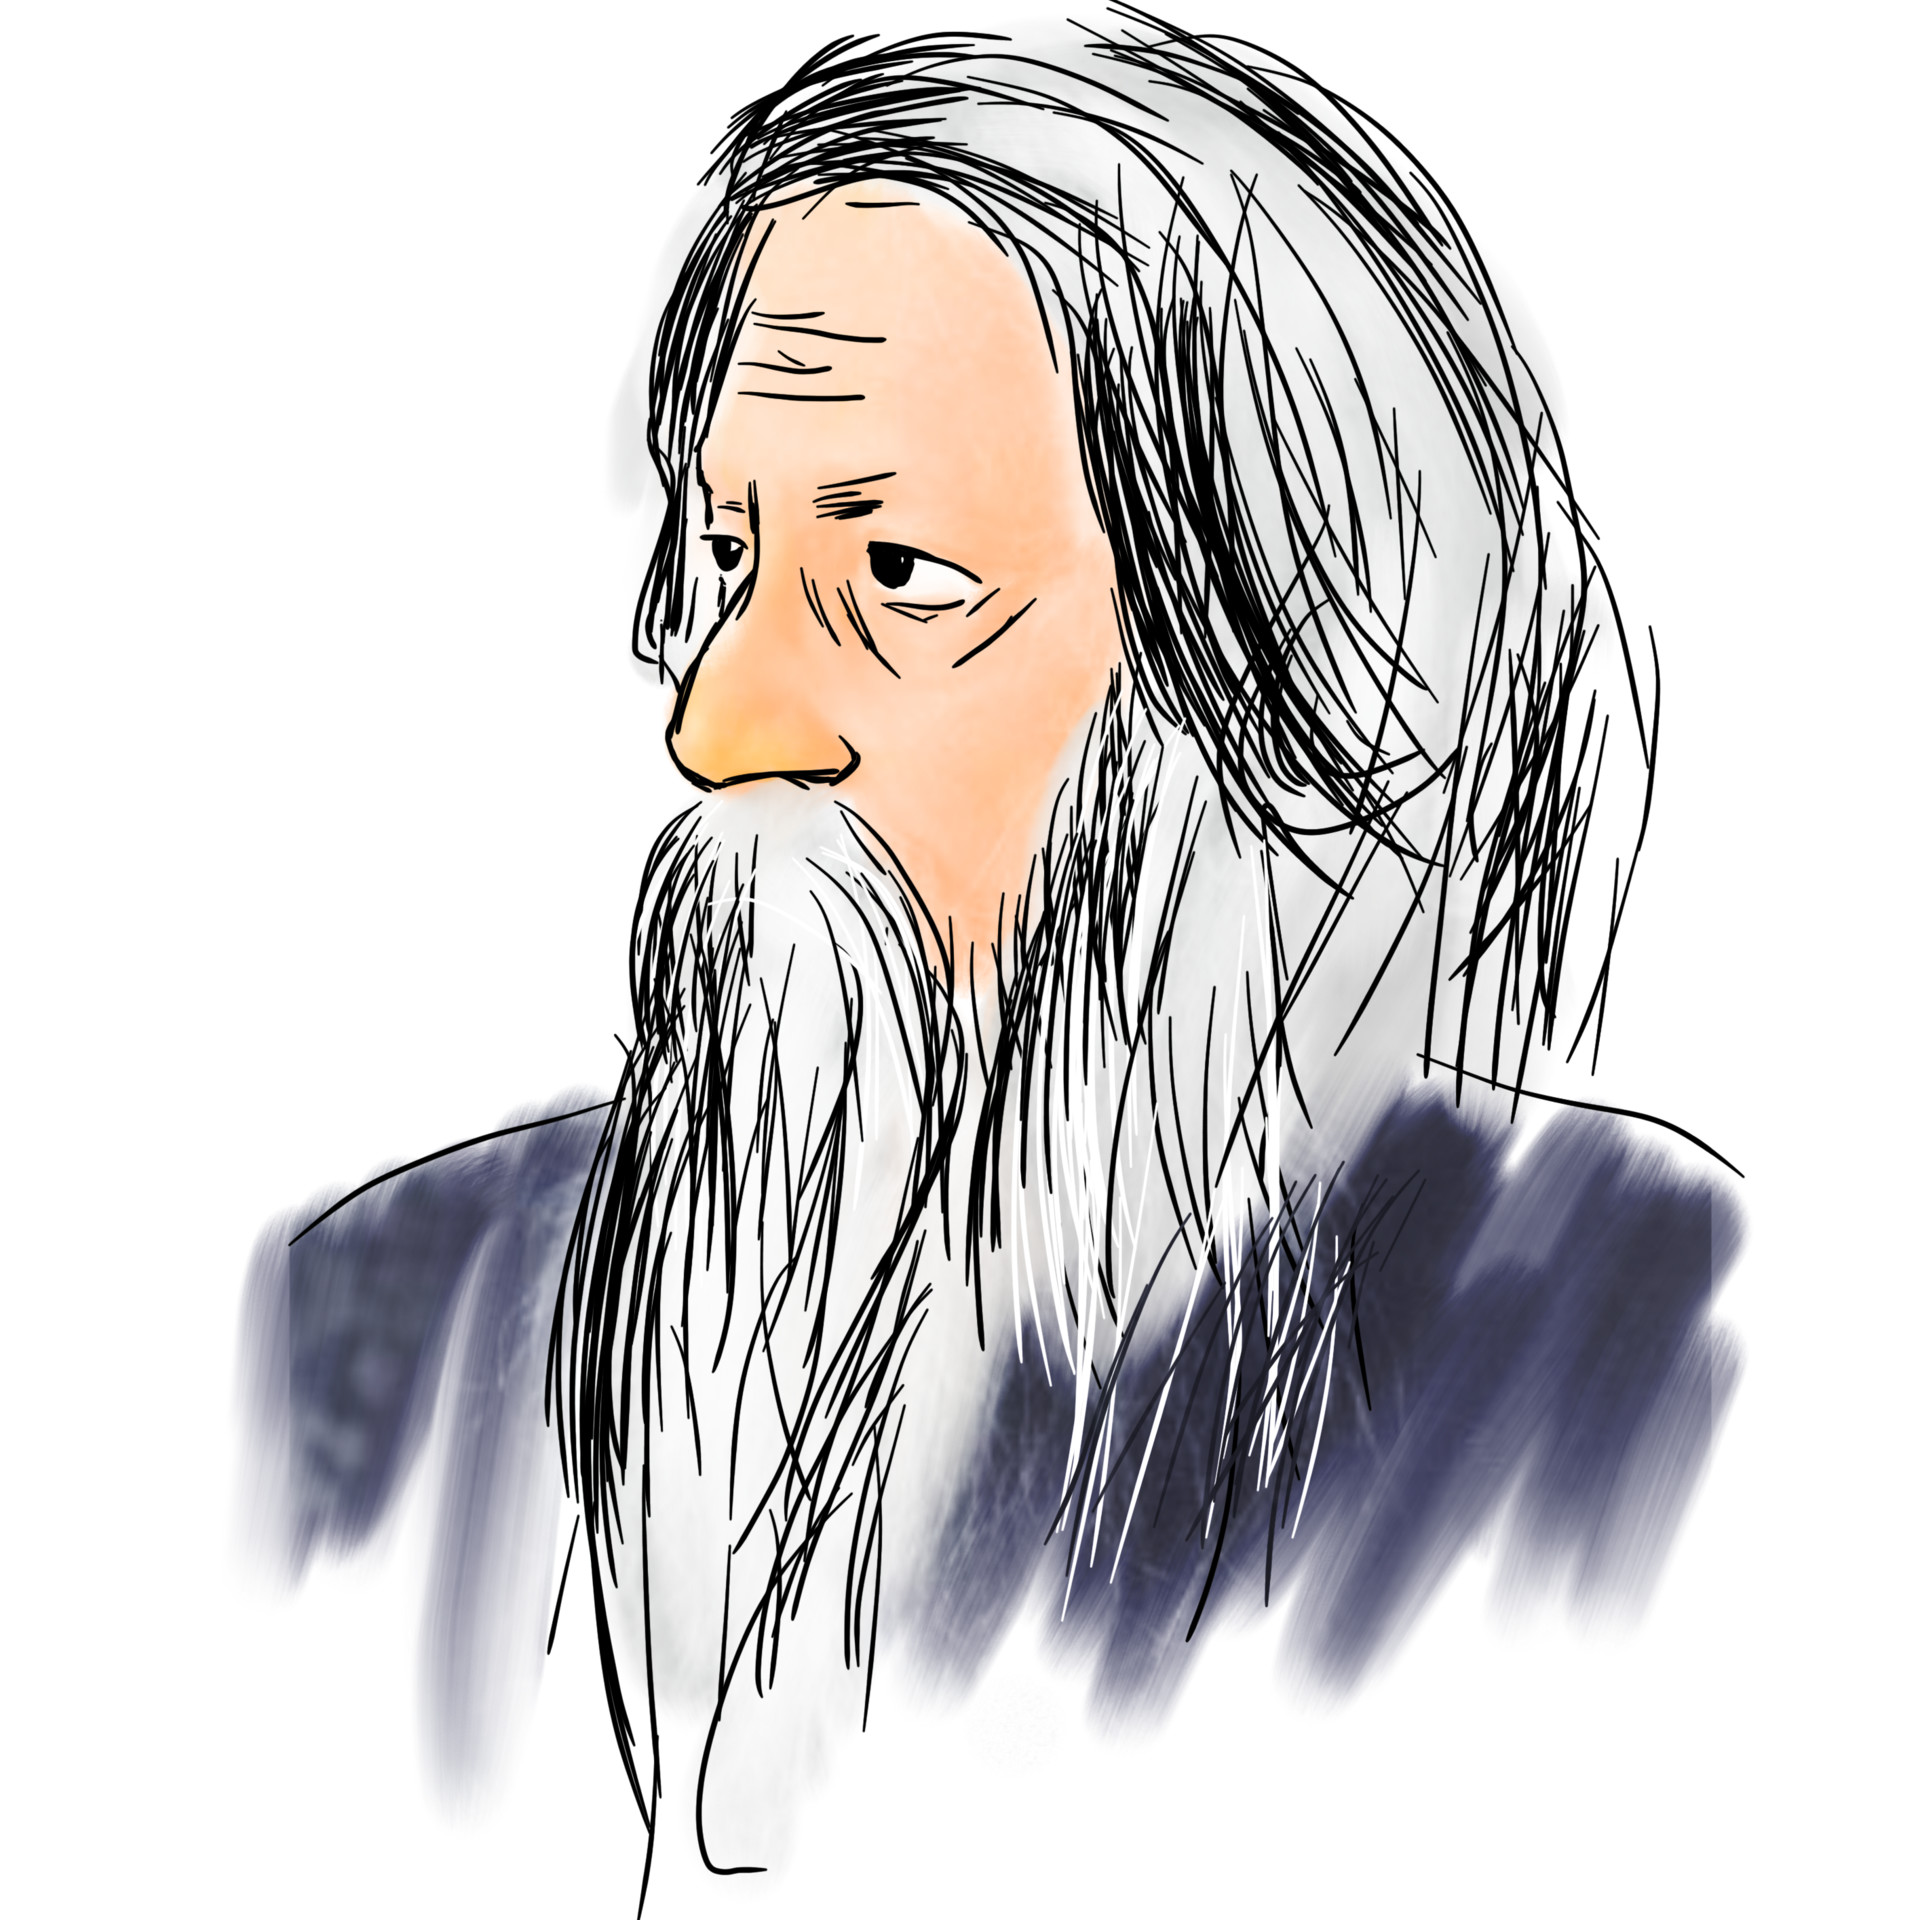 A quick sketch of Rabindranath Tagore - WIP by Praveen Hegde on Dribbble